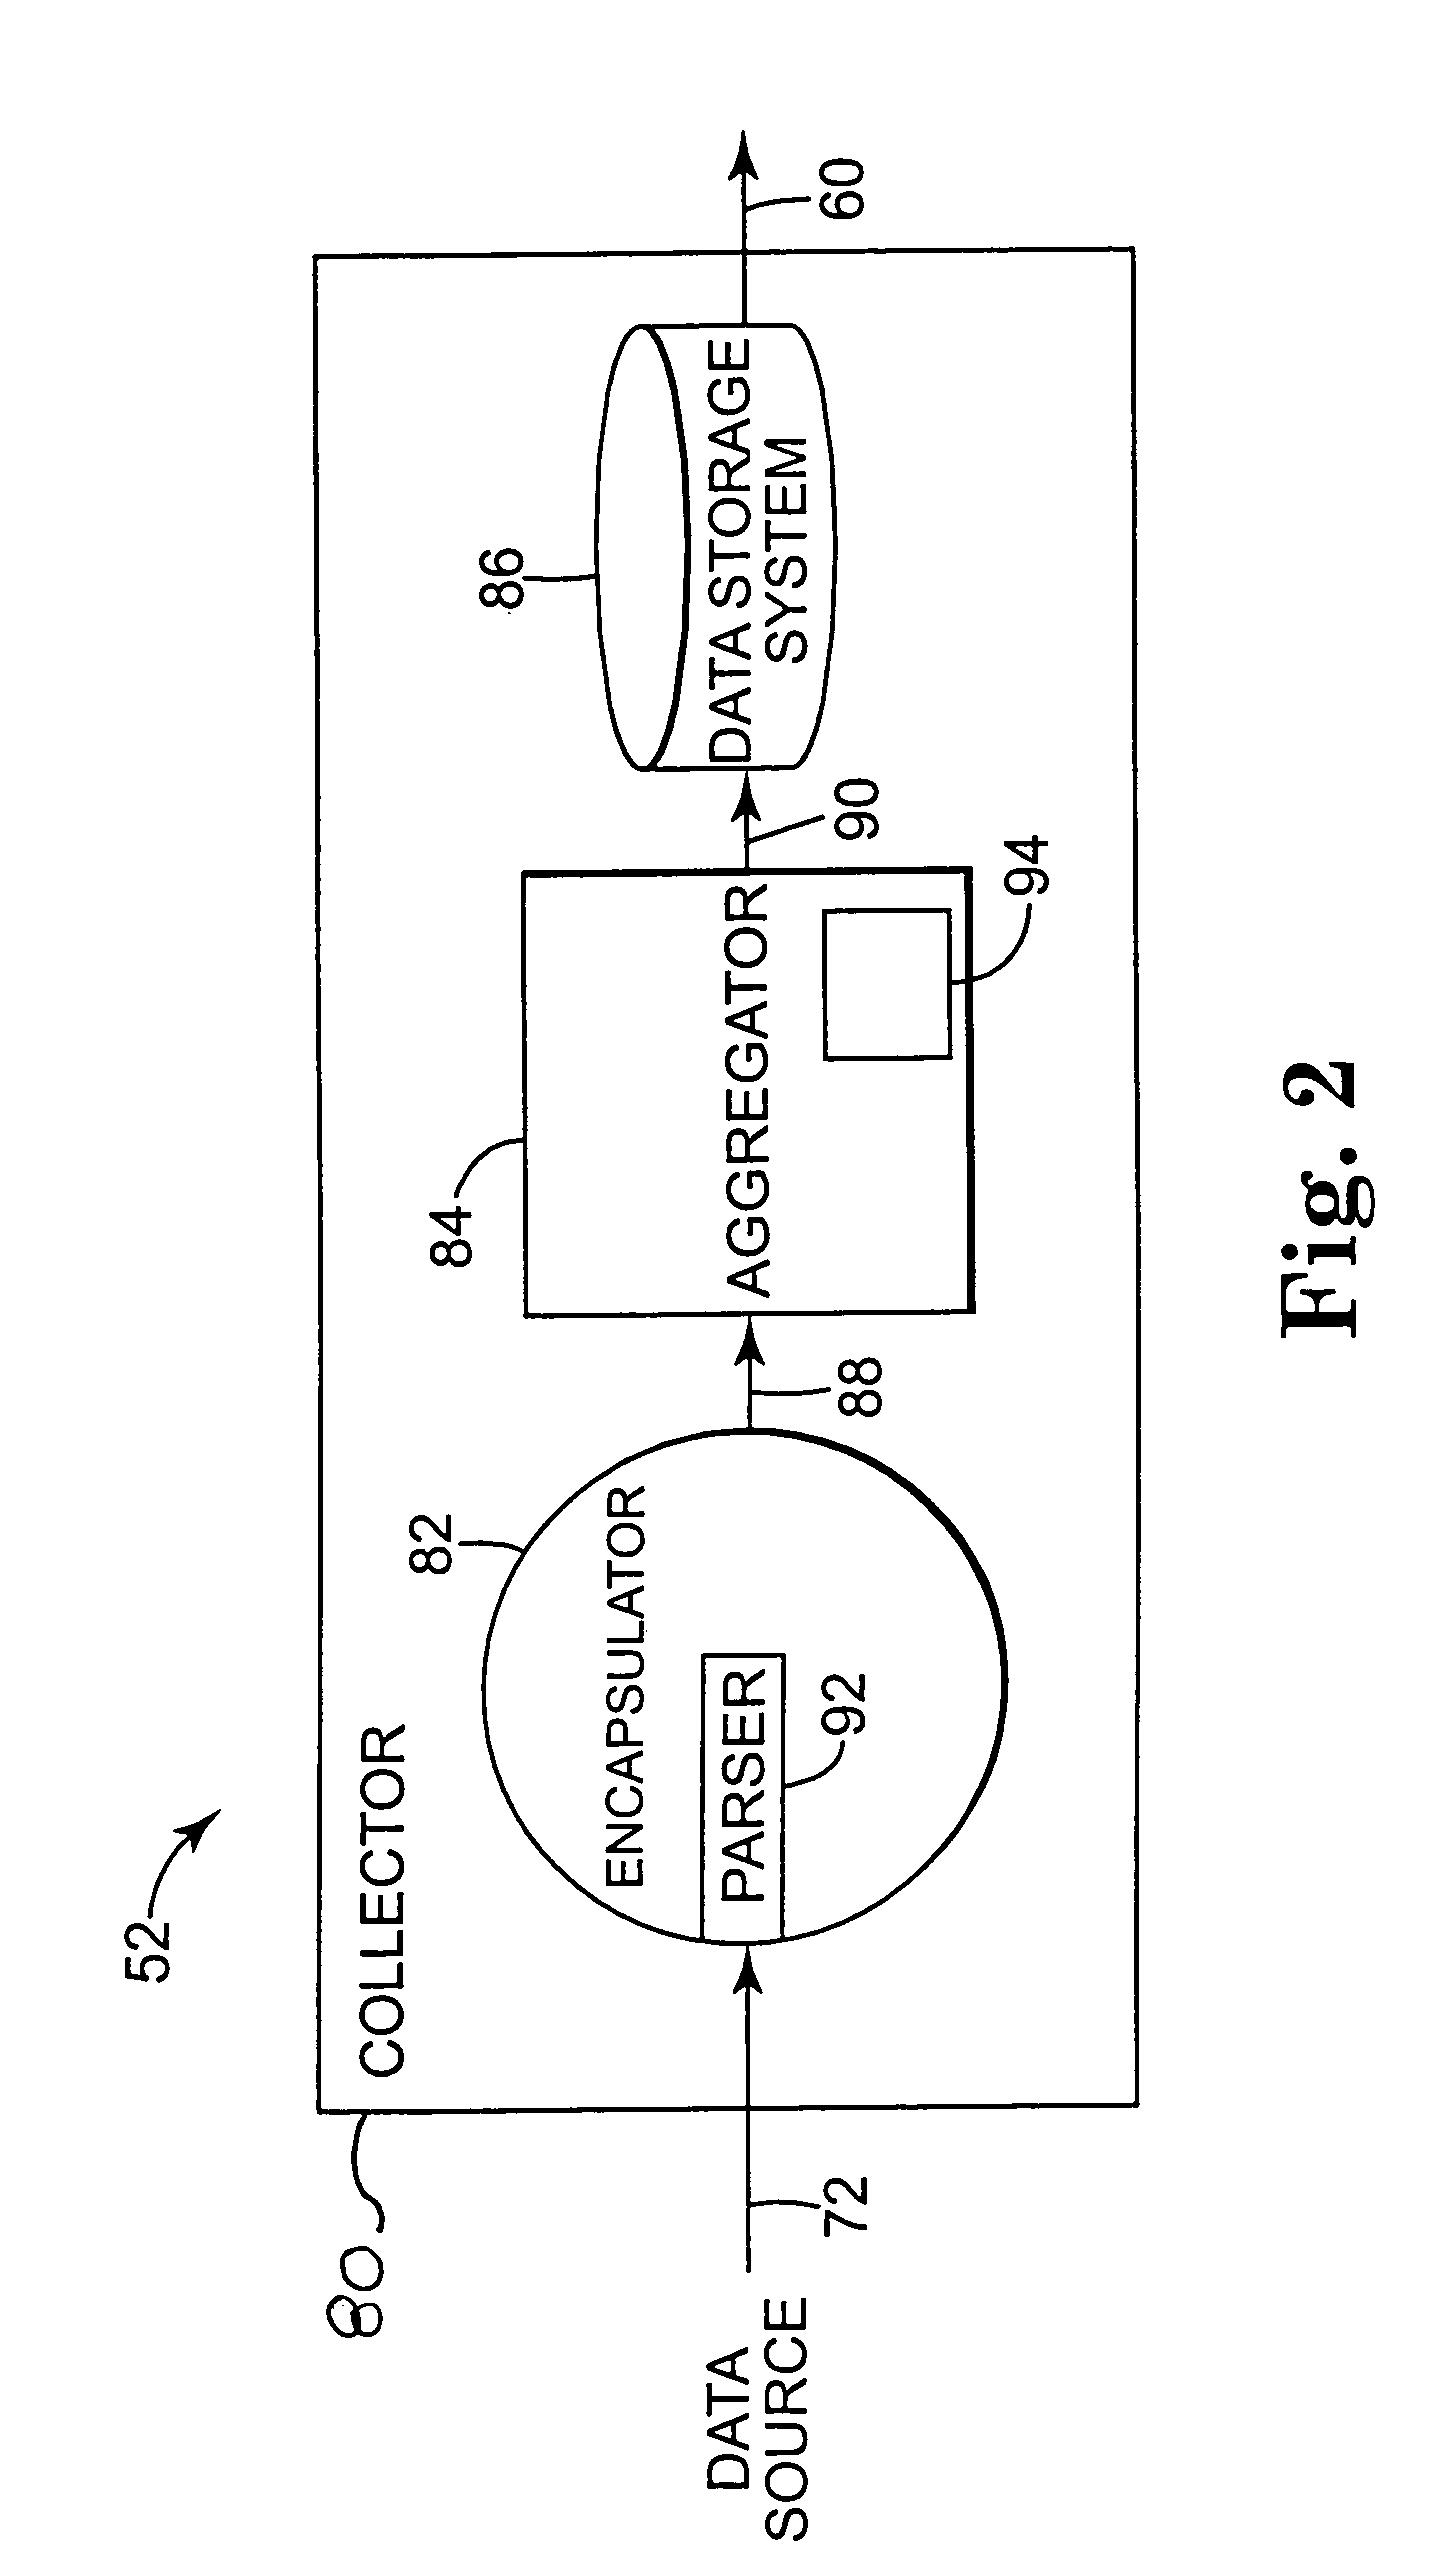 Internet usage data recording system and method employing distributed data processing and data storage